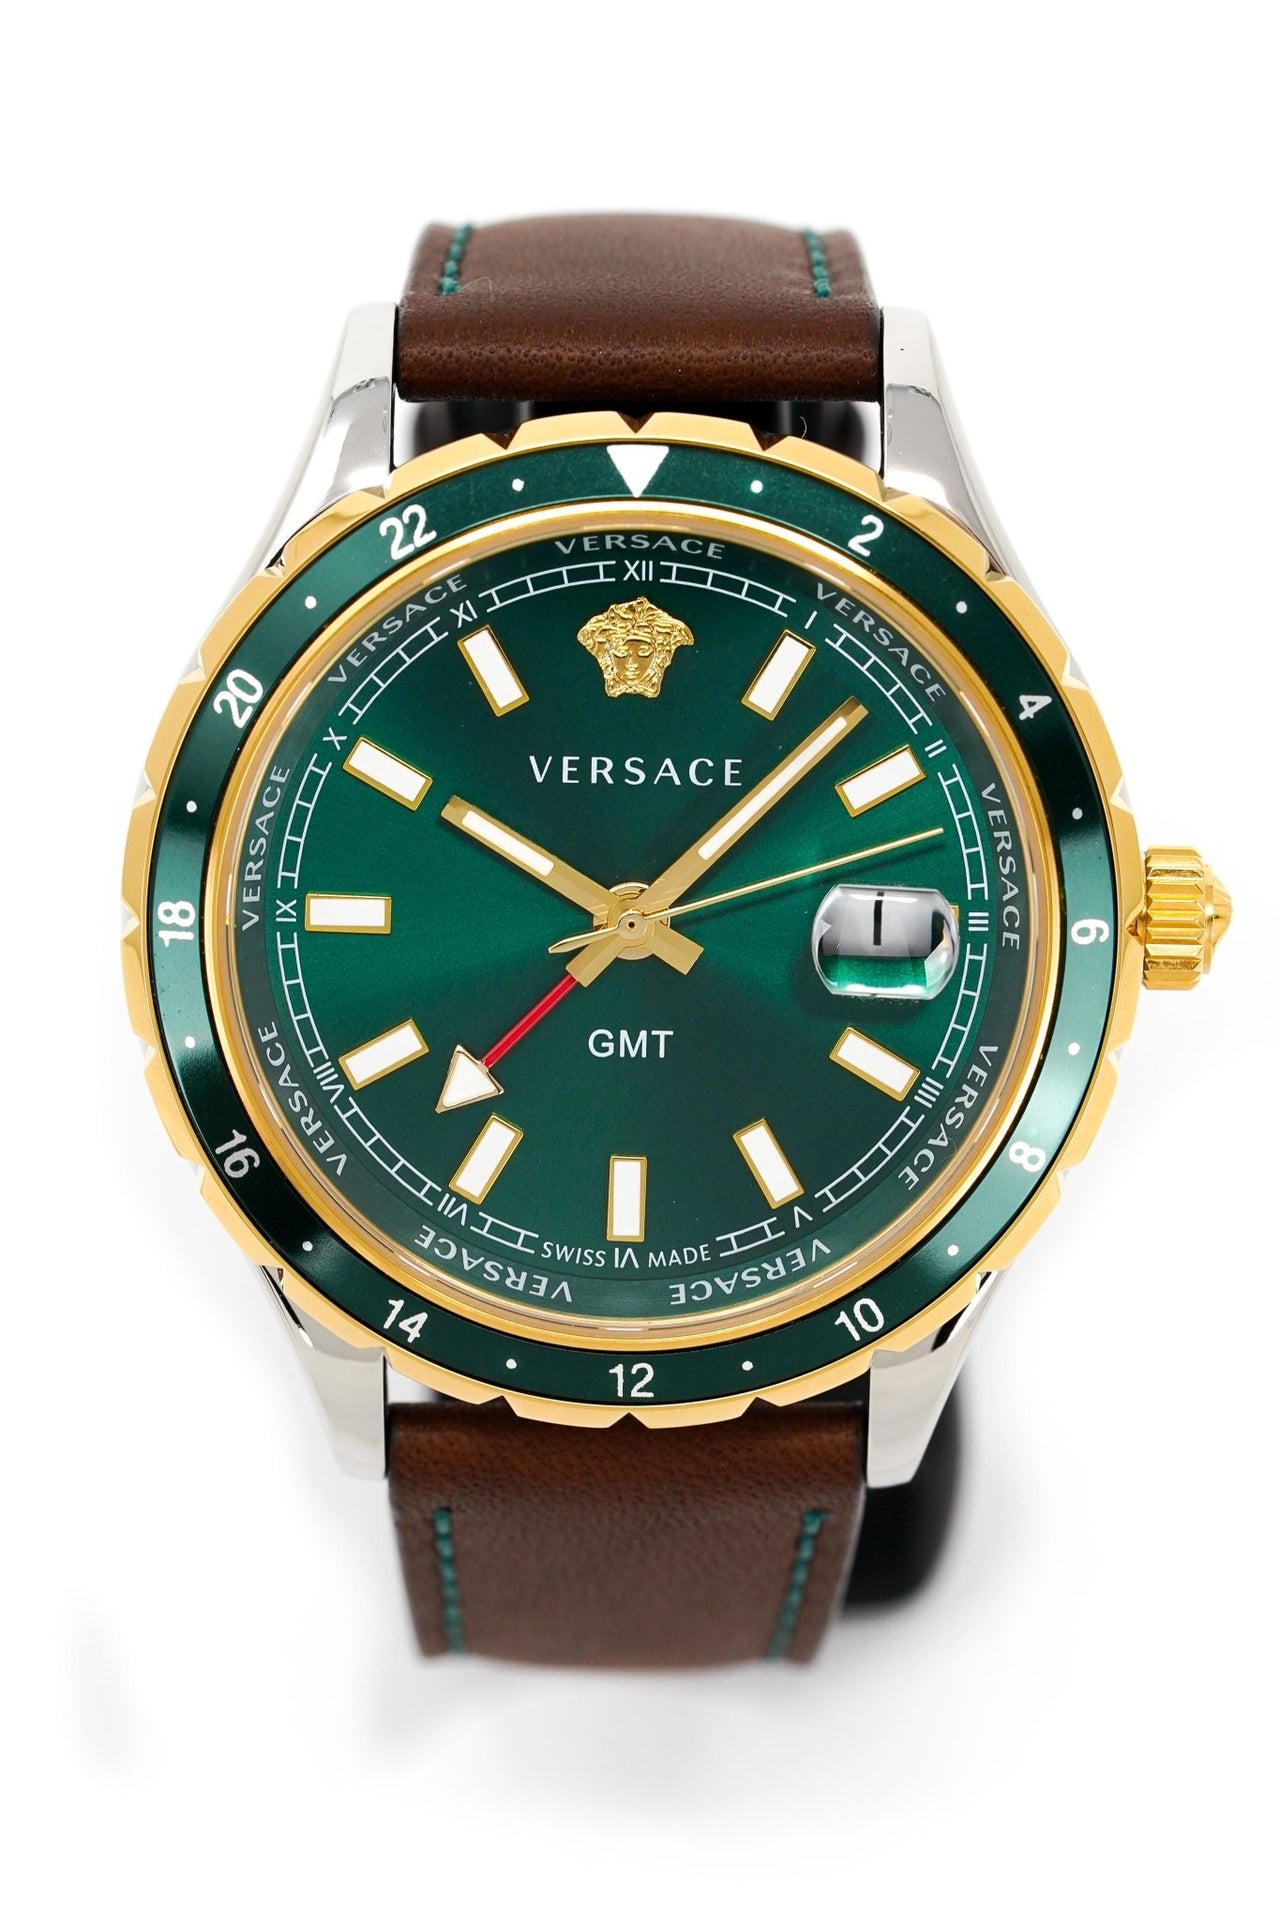 Versace Men's Watch Hellenyium GMT Green Leather V11090017 - Watches & Crystals